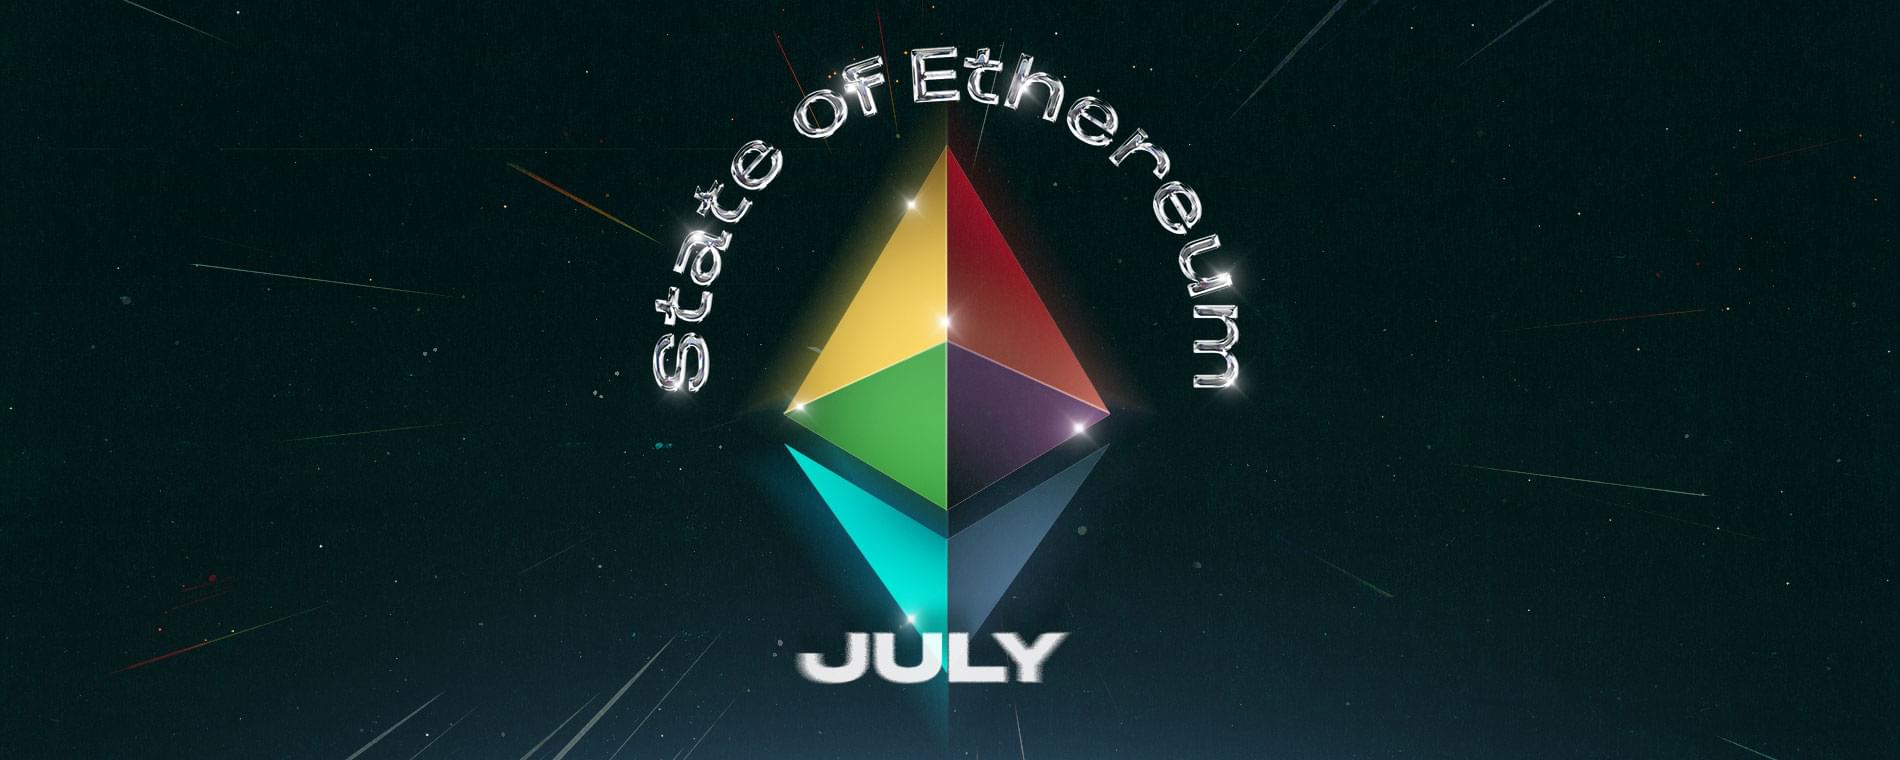 Earn 10% on your ETH! The state of Ethereum in July 2022